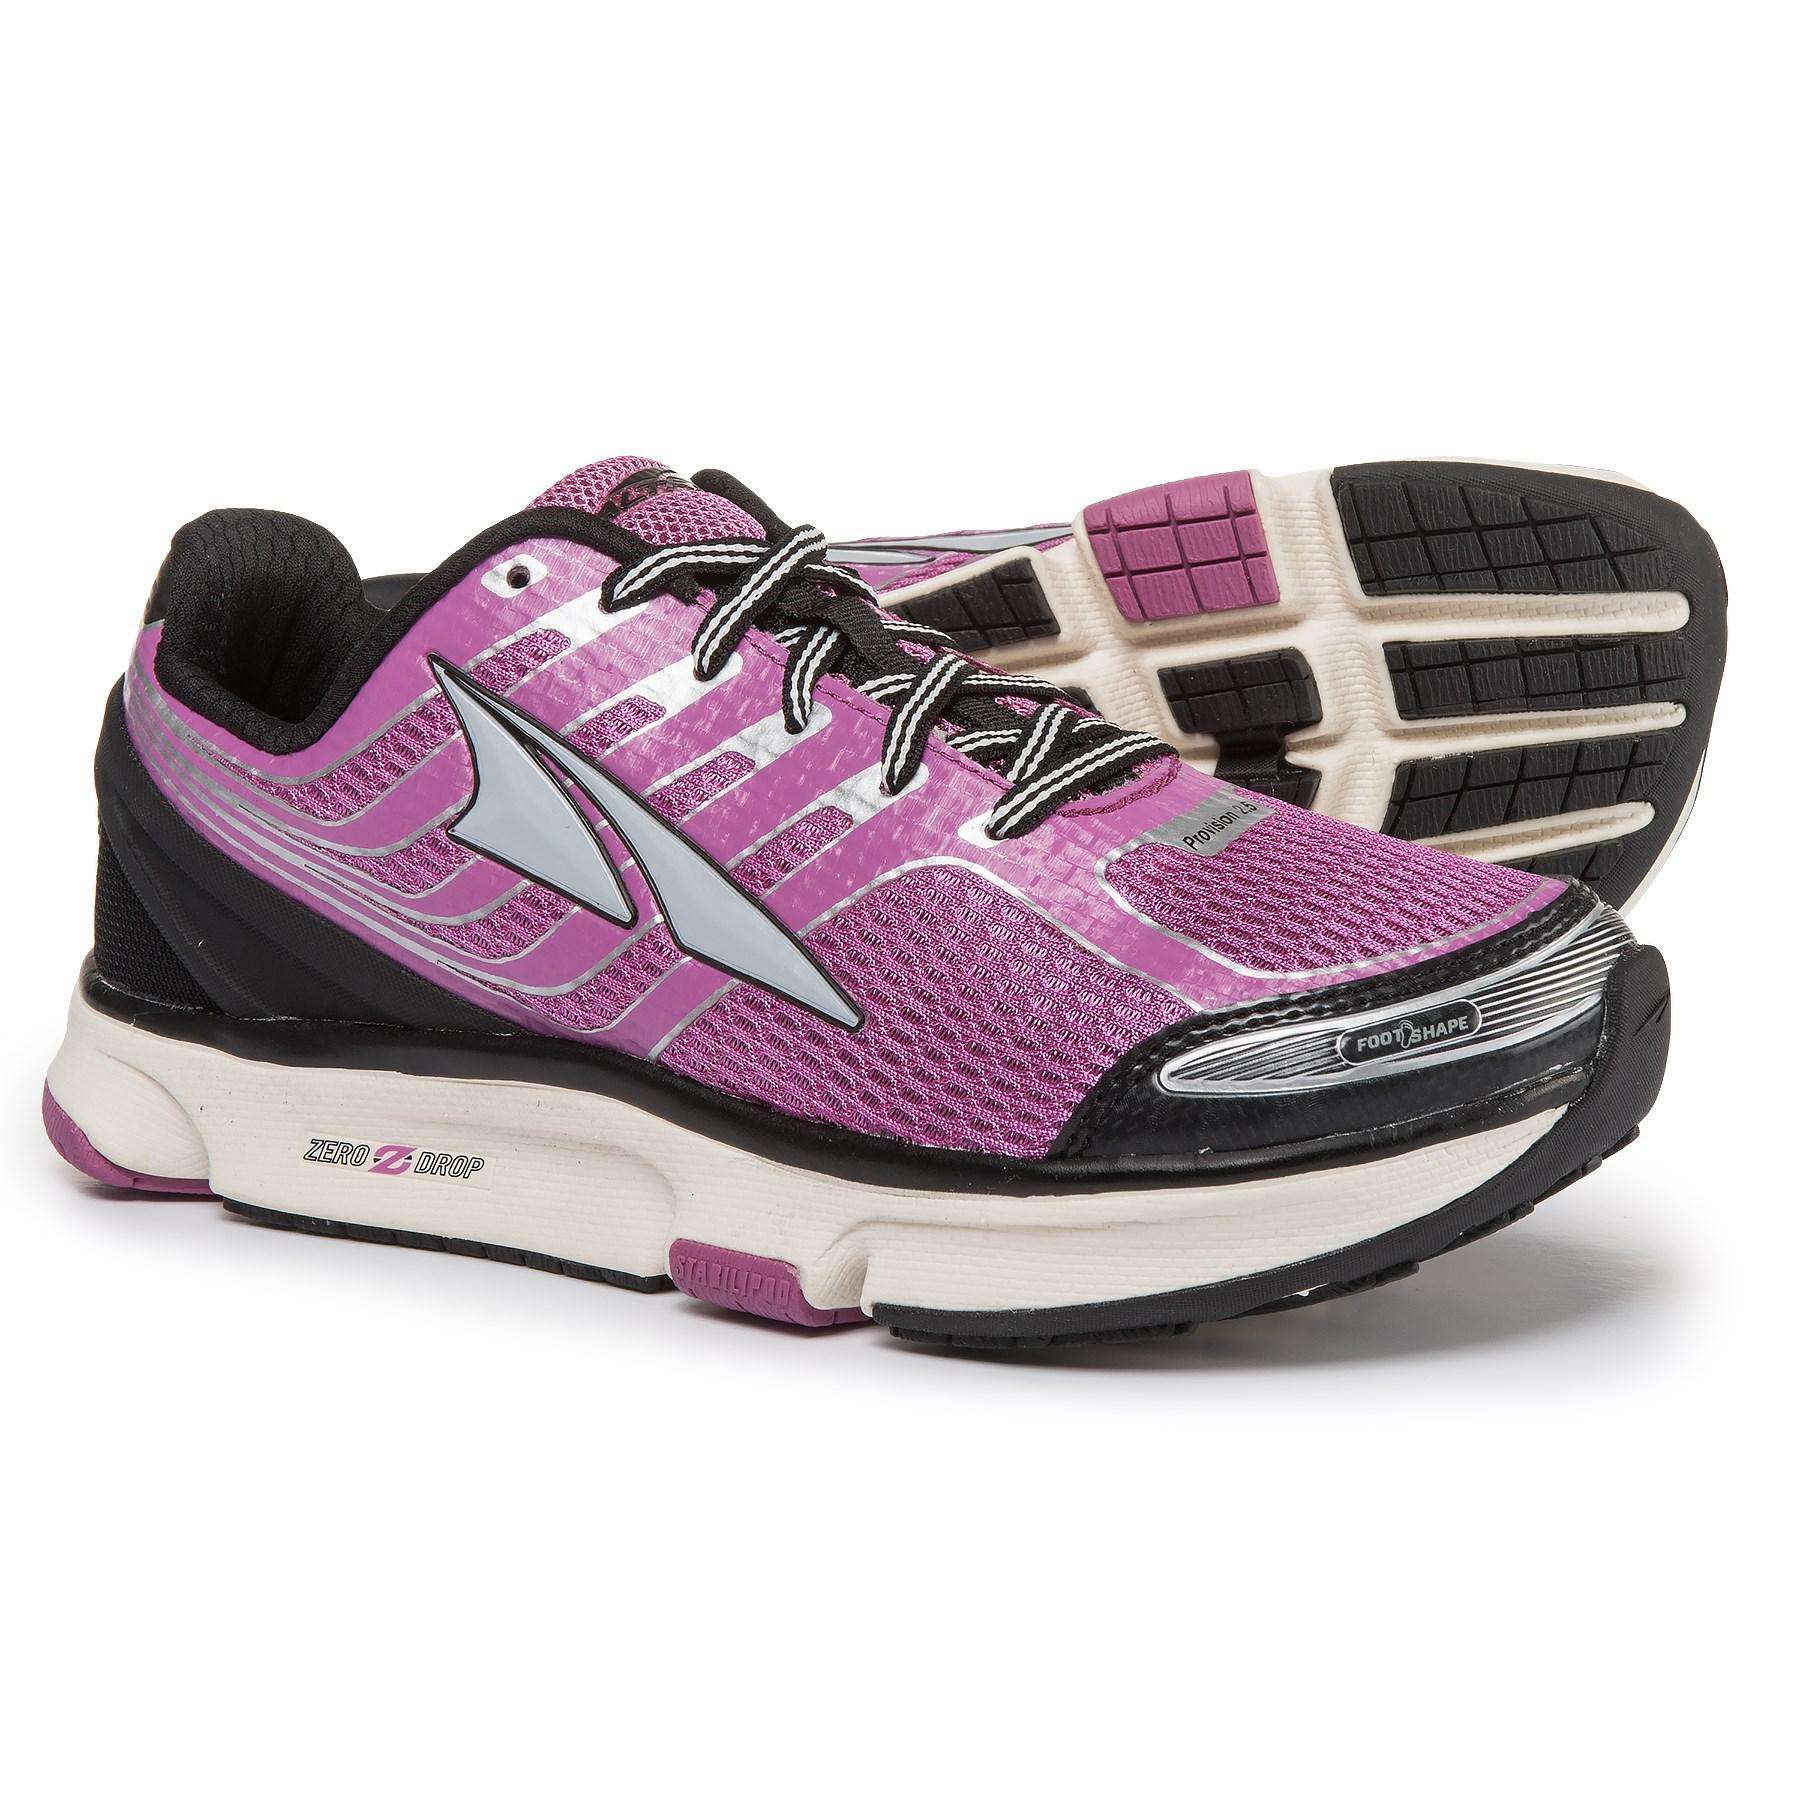 Altra Synthetic Provision 2.5 Running Shoes (for Women) in ...